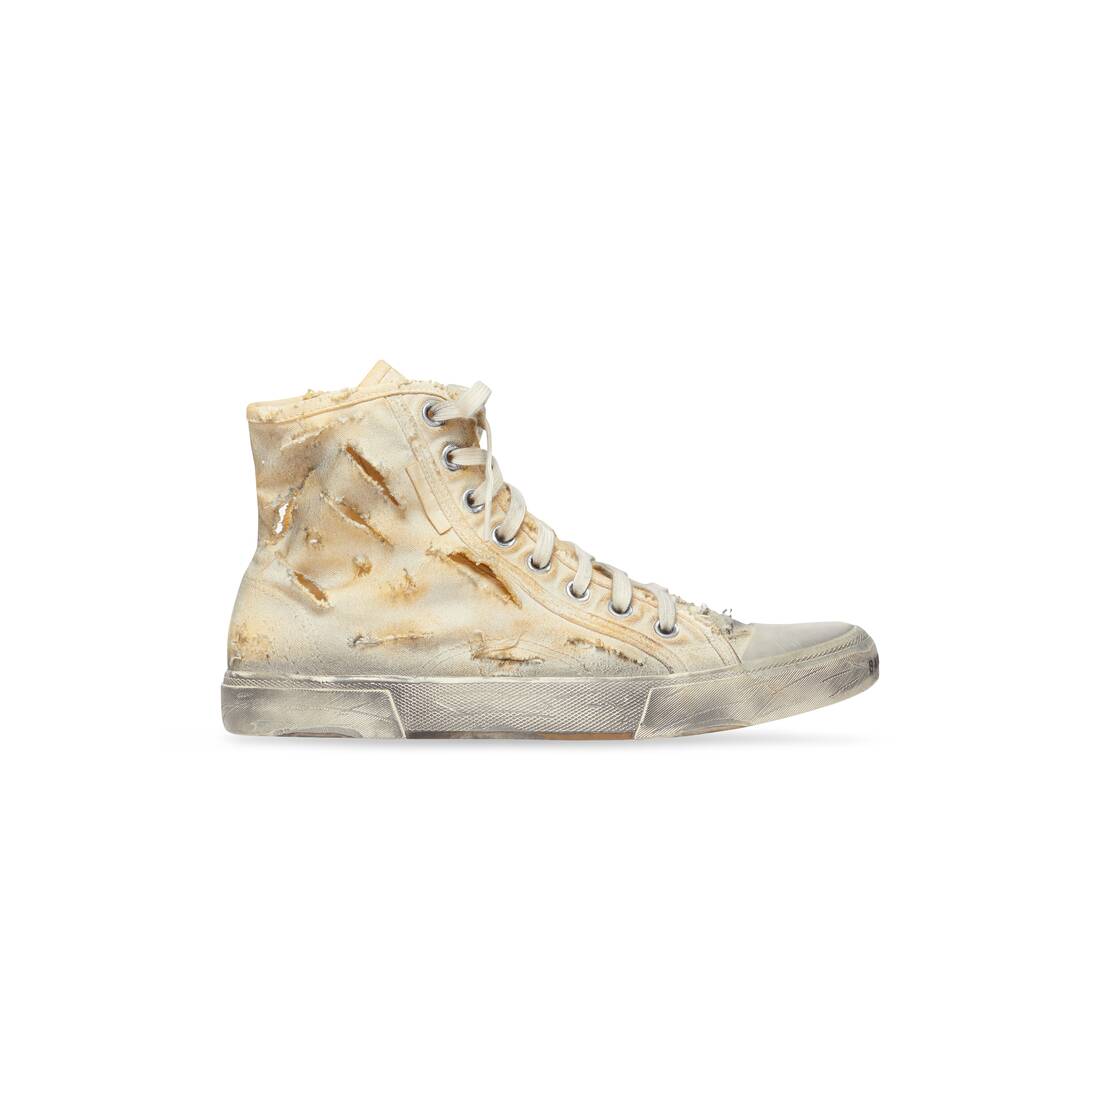 Paris High Top Sneaker in white full destroyed cotton and rubber 